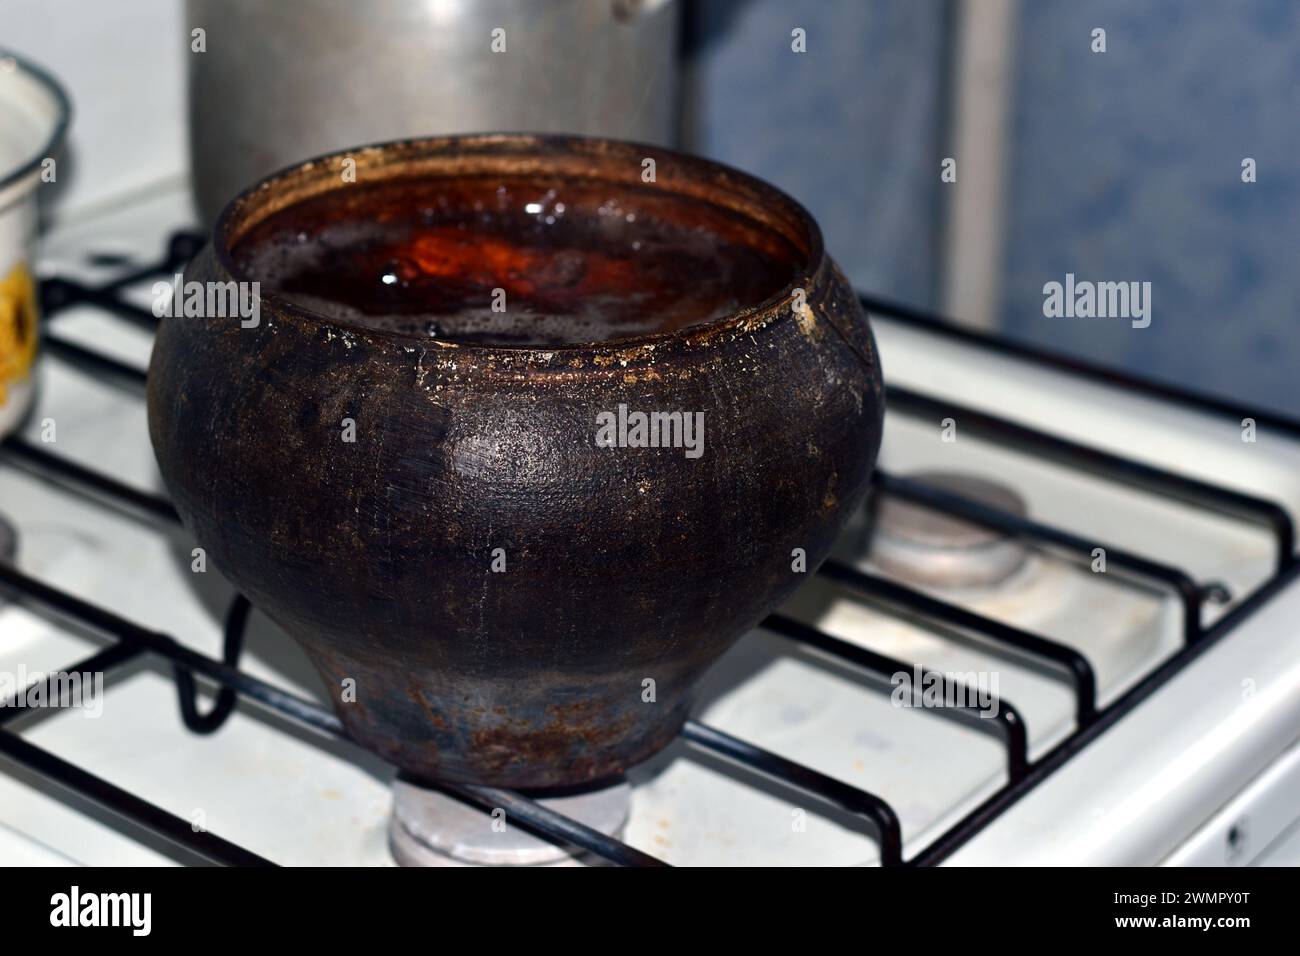 The picture shows an old cast iron pot on a gas stove, vegetables are being boiled. Stock Photo